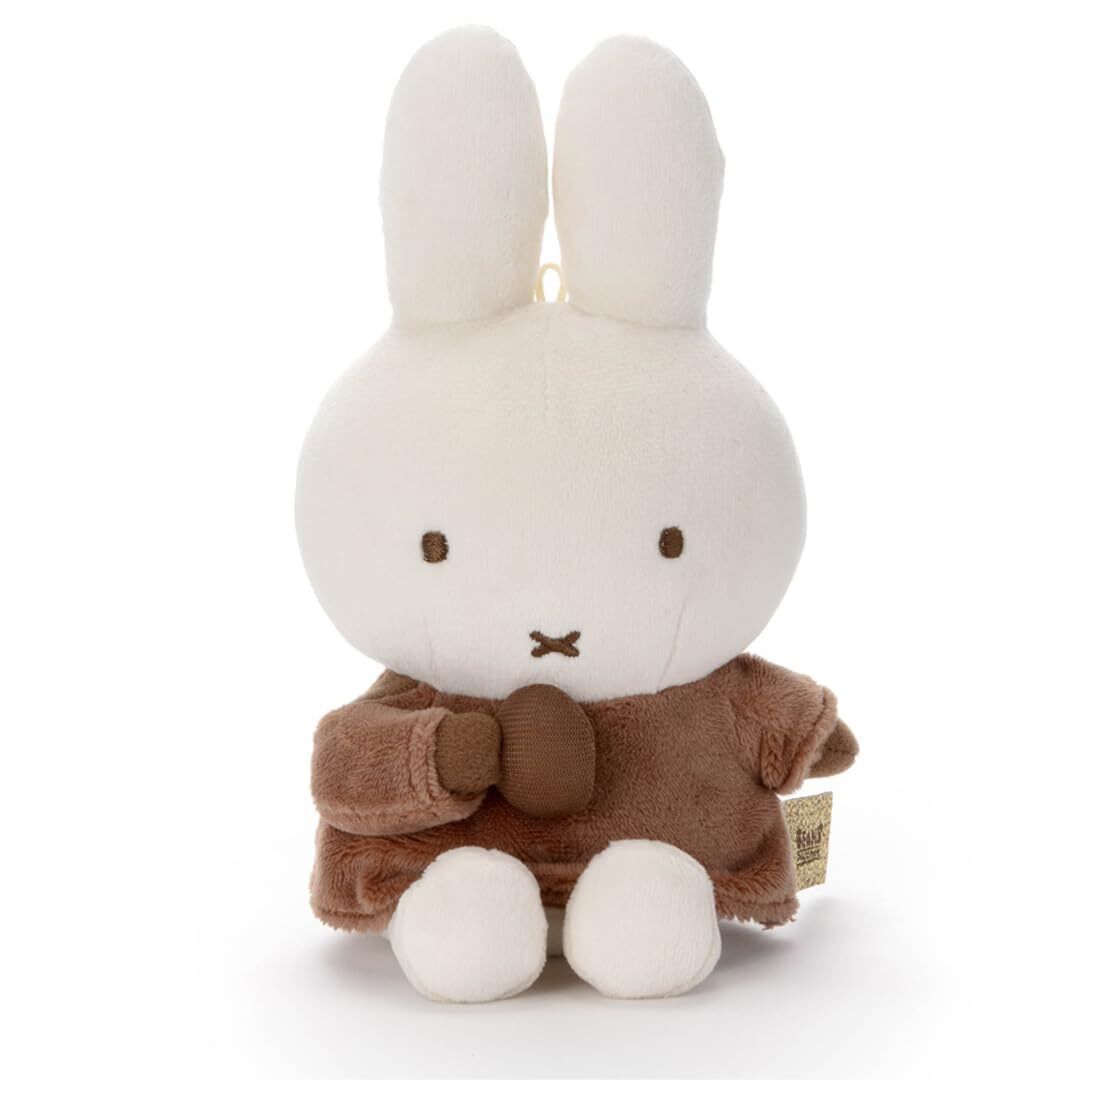 Takara Tomy Cacao Bruna washable Beans Collection Miffy Plush Doll Stuffed Toy